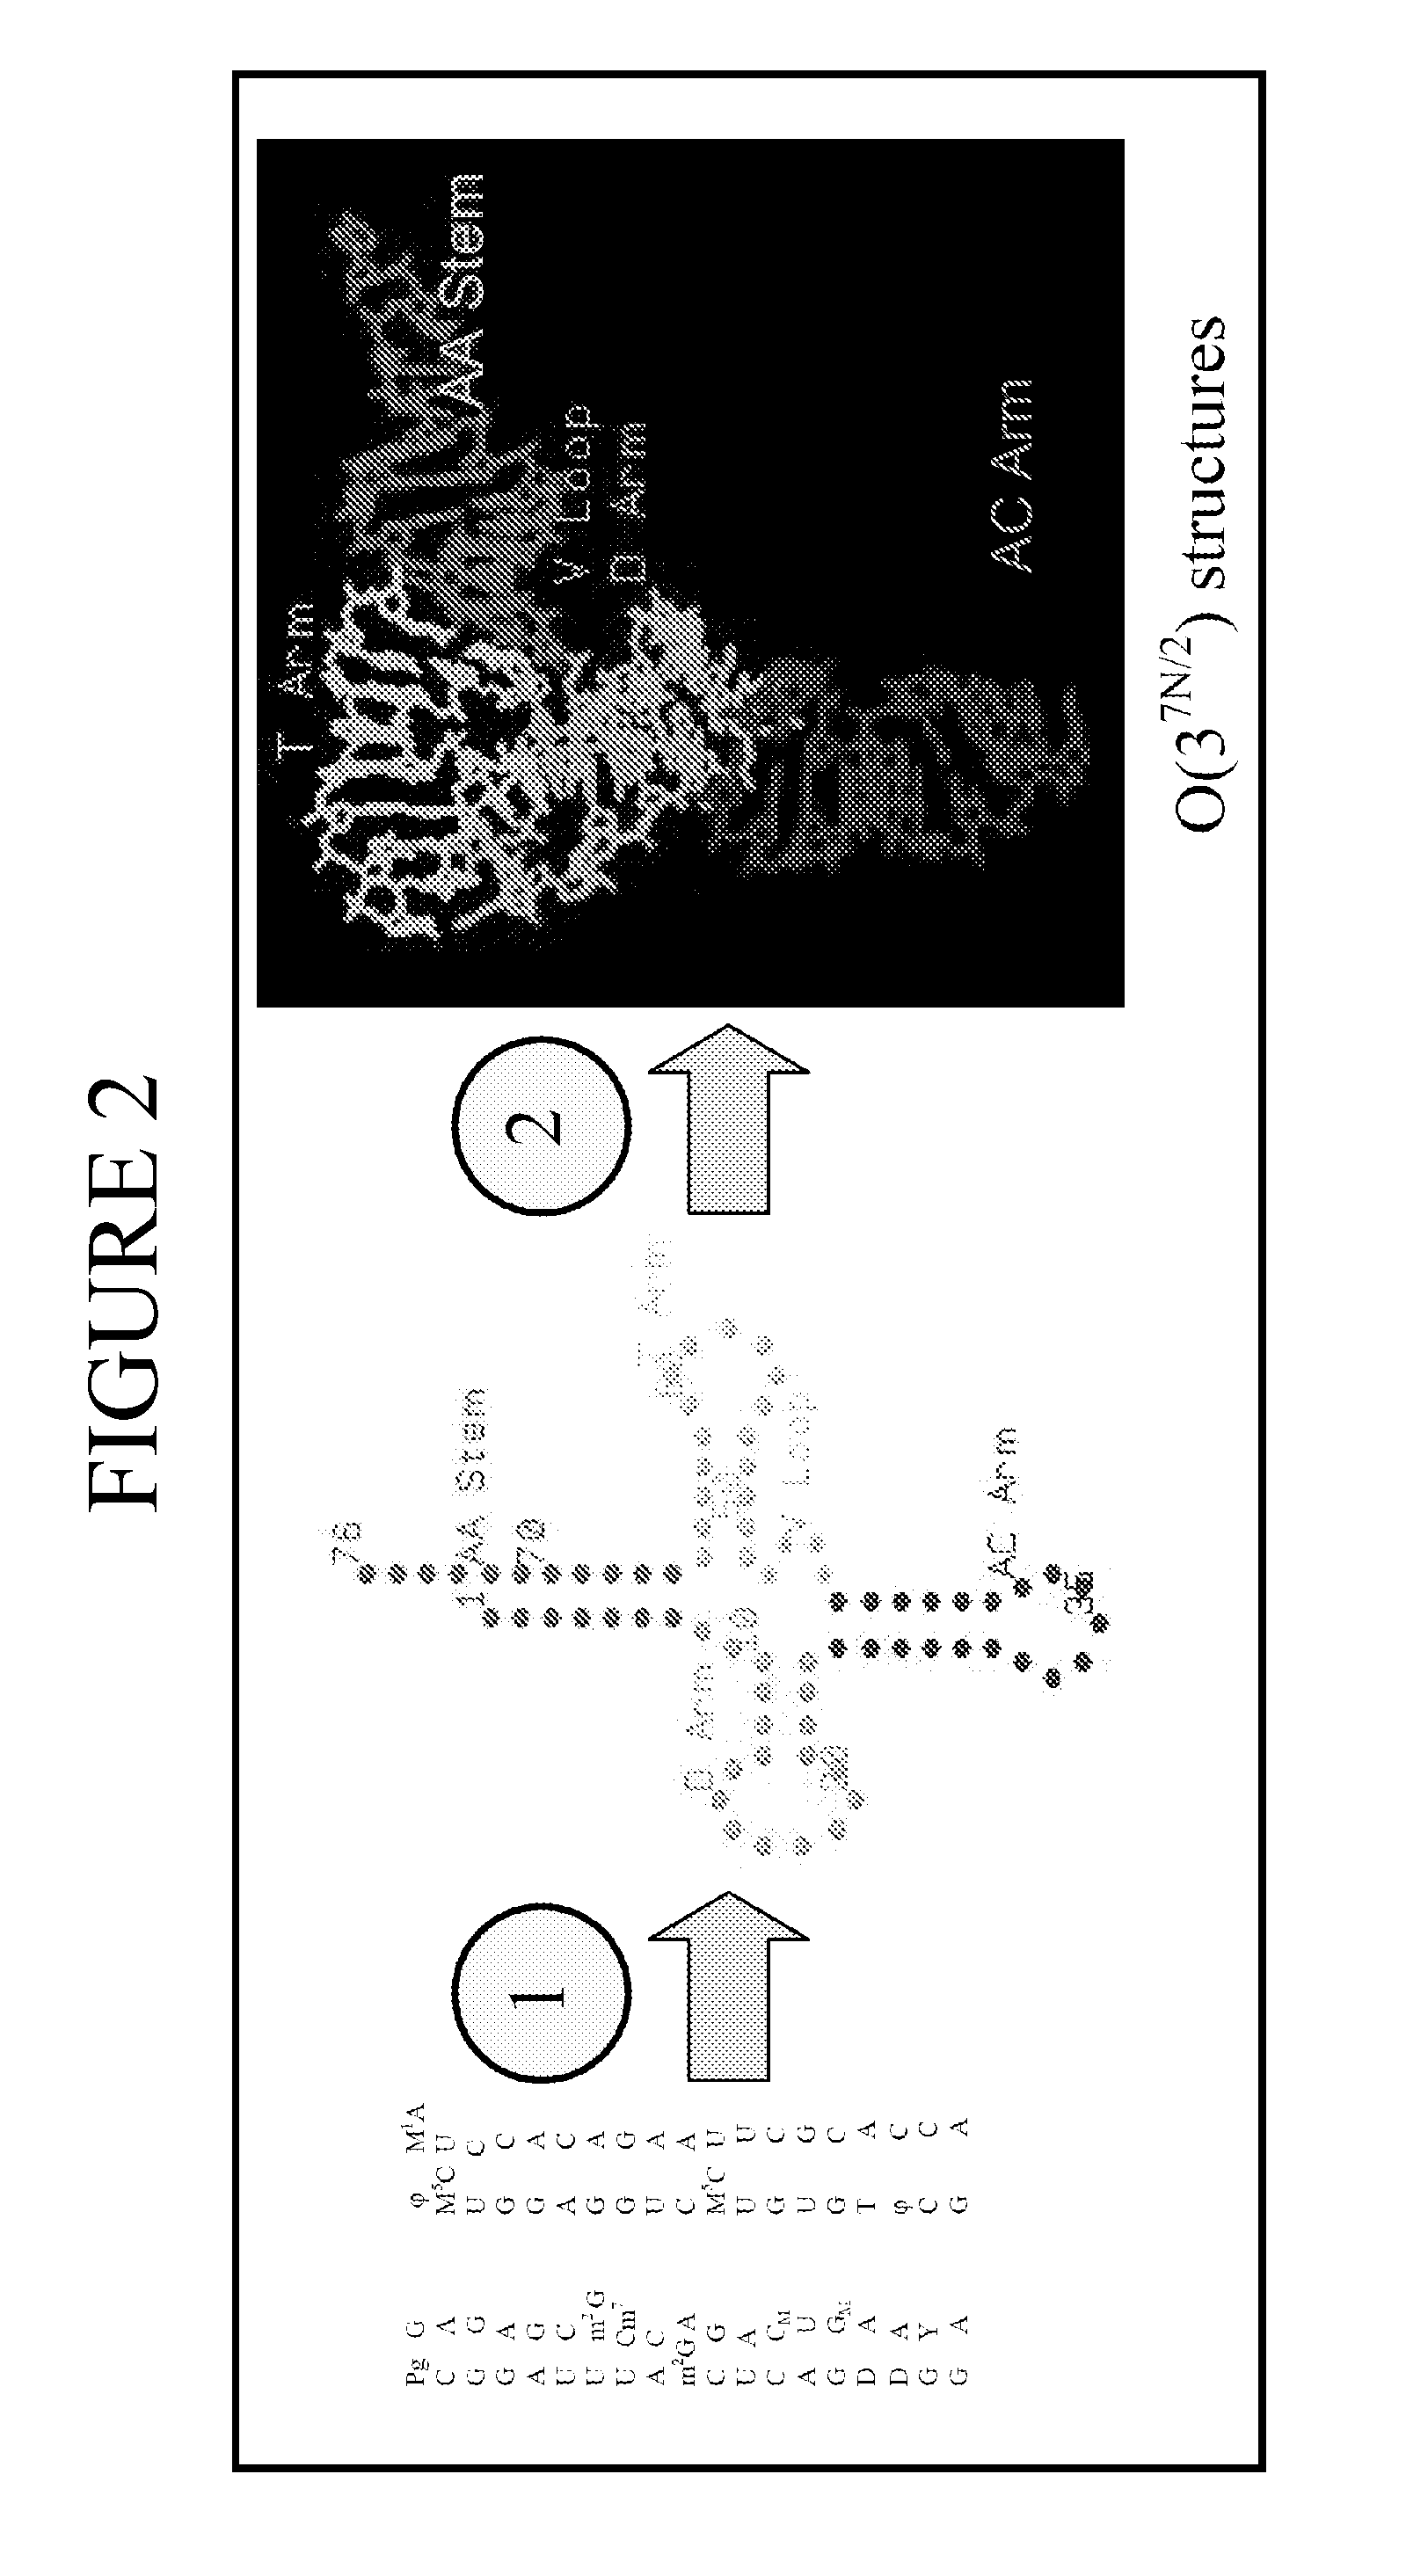 System and methods for three dimensional molecular structural analysis